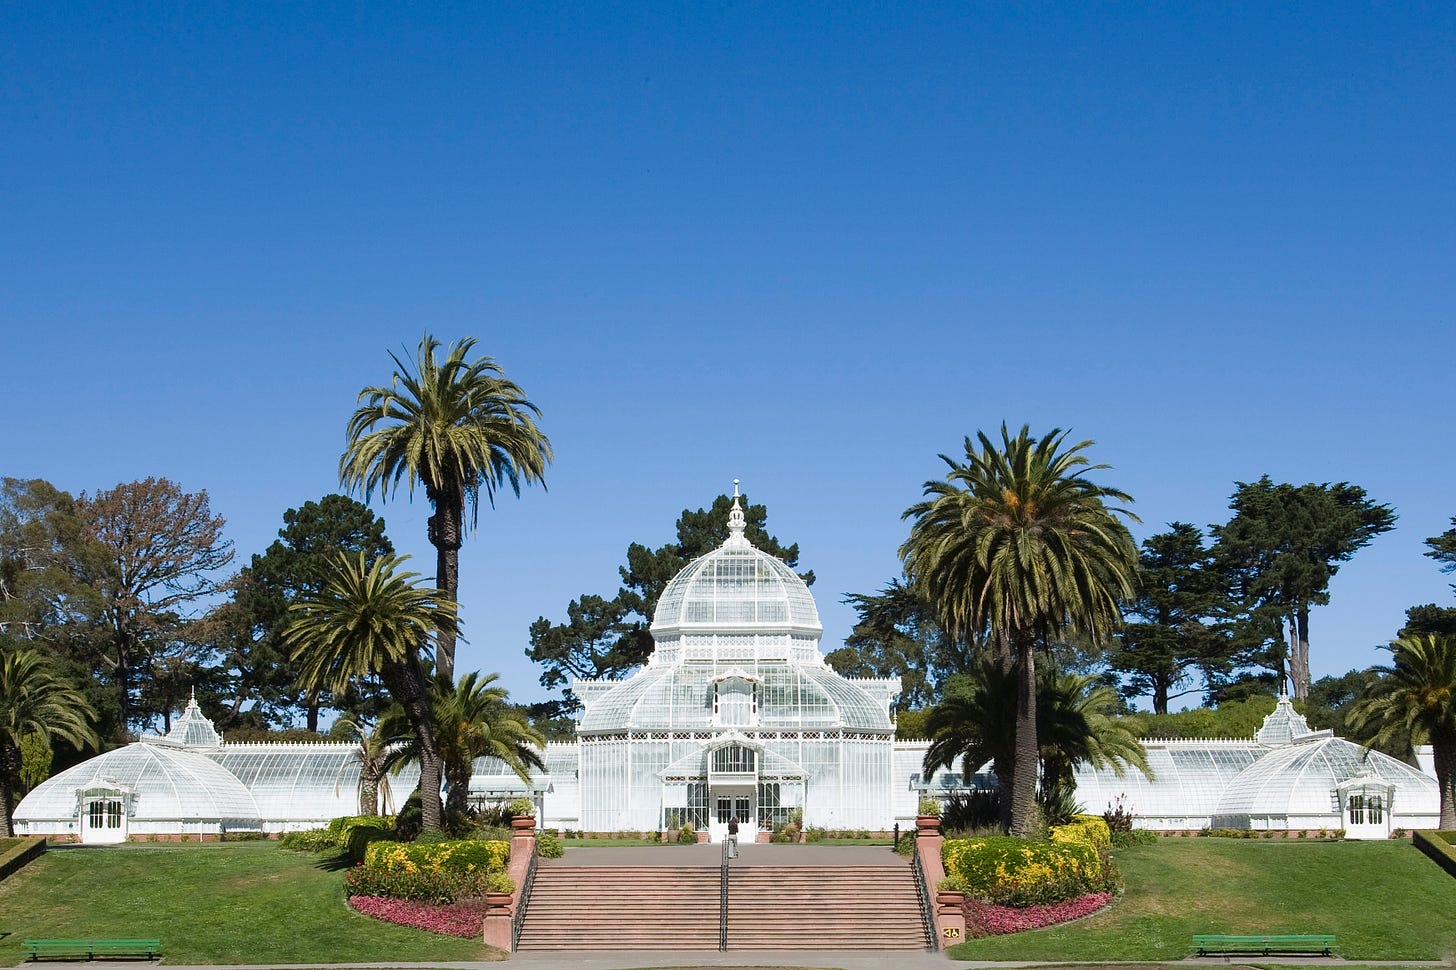 Conservatory of Flowers - Wikipedia